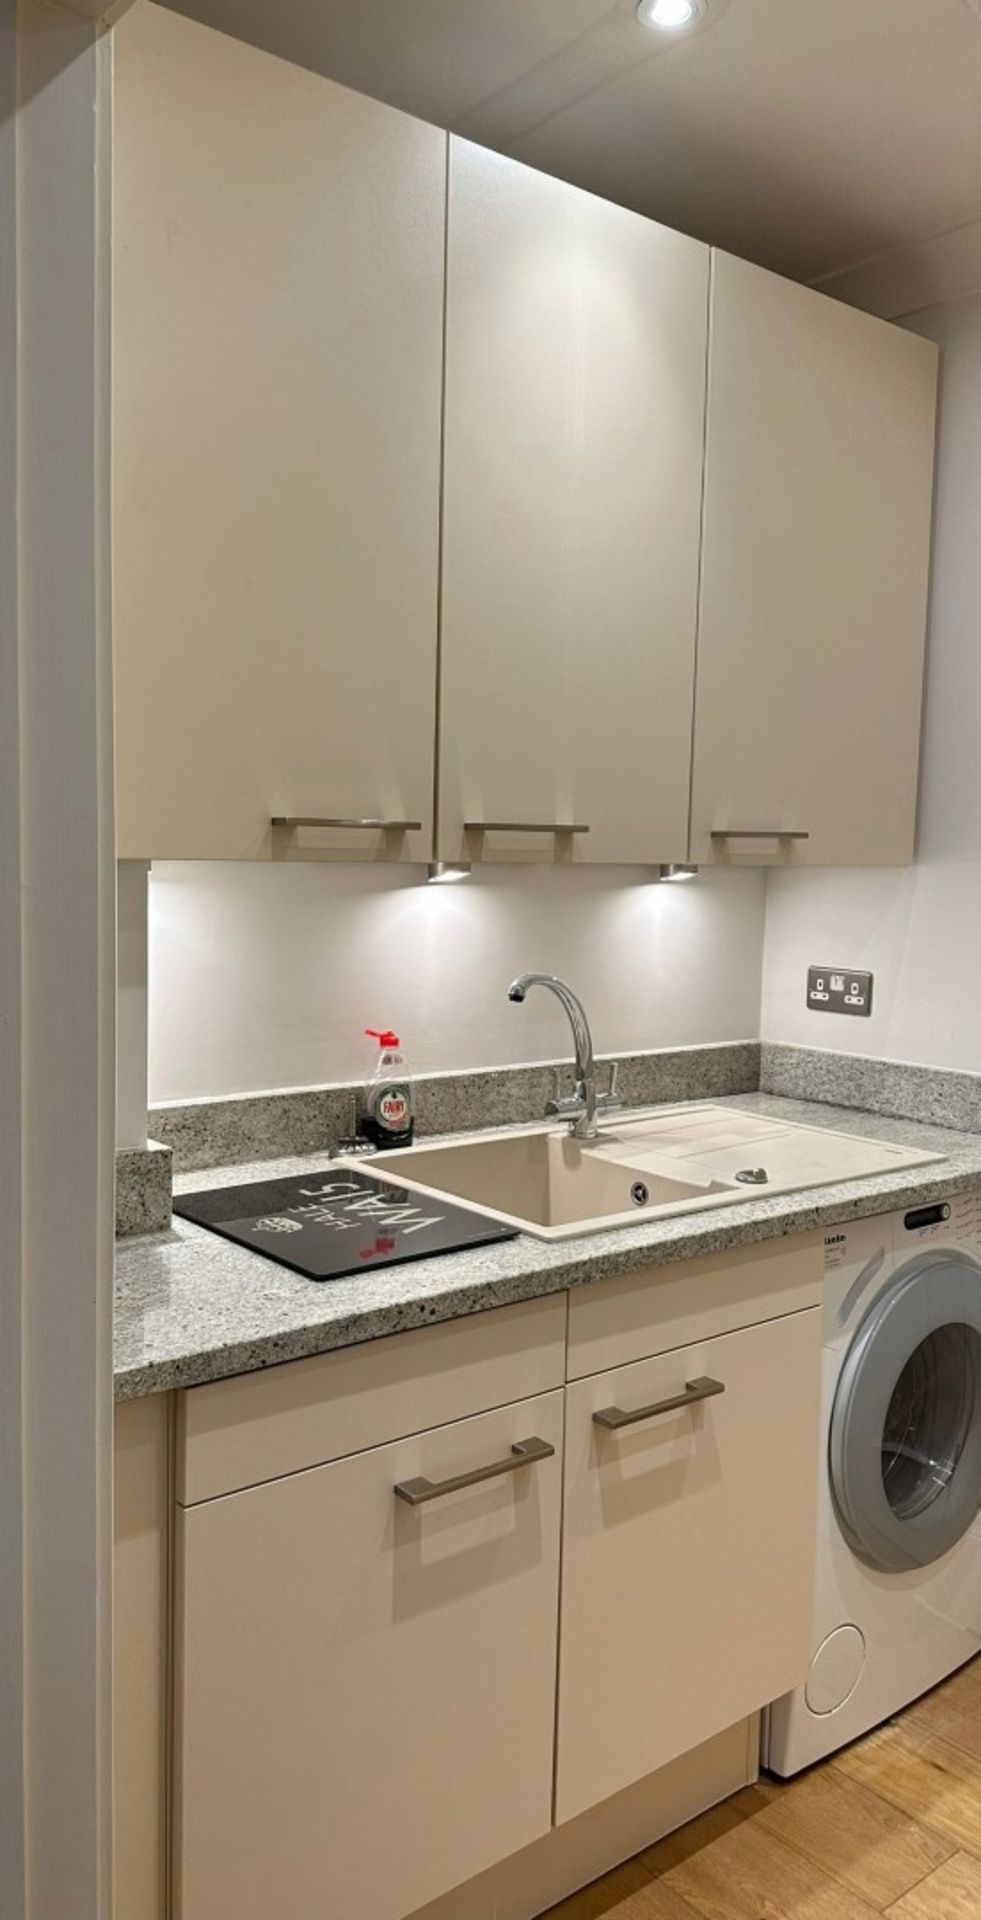 1 x Stunning SIEMATIC Luxury Fitted Handleless Kitchen In Cream, With Marble - Image 40 of 41